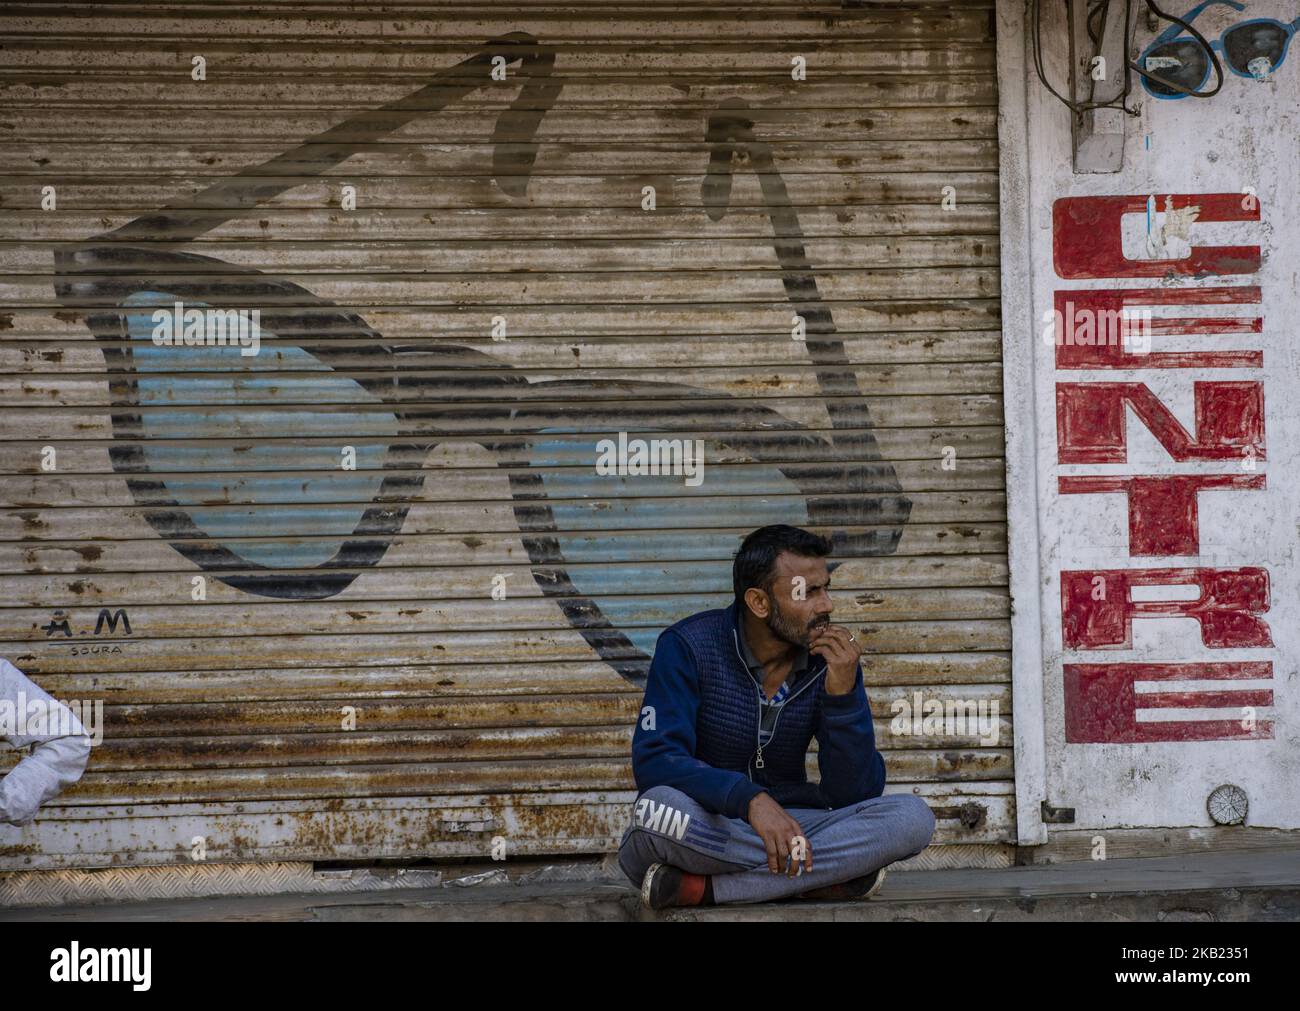 A man rests on the porch of a shuttered shop during a strike against the killing of a Kashmiri rebel commander on October 12, 2018 in Srinagar, the summer capital of Indian administered Kashmir, India. Kashmiri youth clashed with Indian government forces who were deployed in strength in different parts of Srinagar on Friday to prevent protests against the killing of a Kashmiri rebel commander in Kupwara district of Indian-administered Kashmir the previous day. Manan Wani, who had quit his doctorate in Geology at an Indian university to join the Hizb-ul-Mujahideen militant outfit this year and  Stock Photo